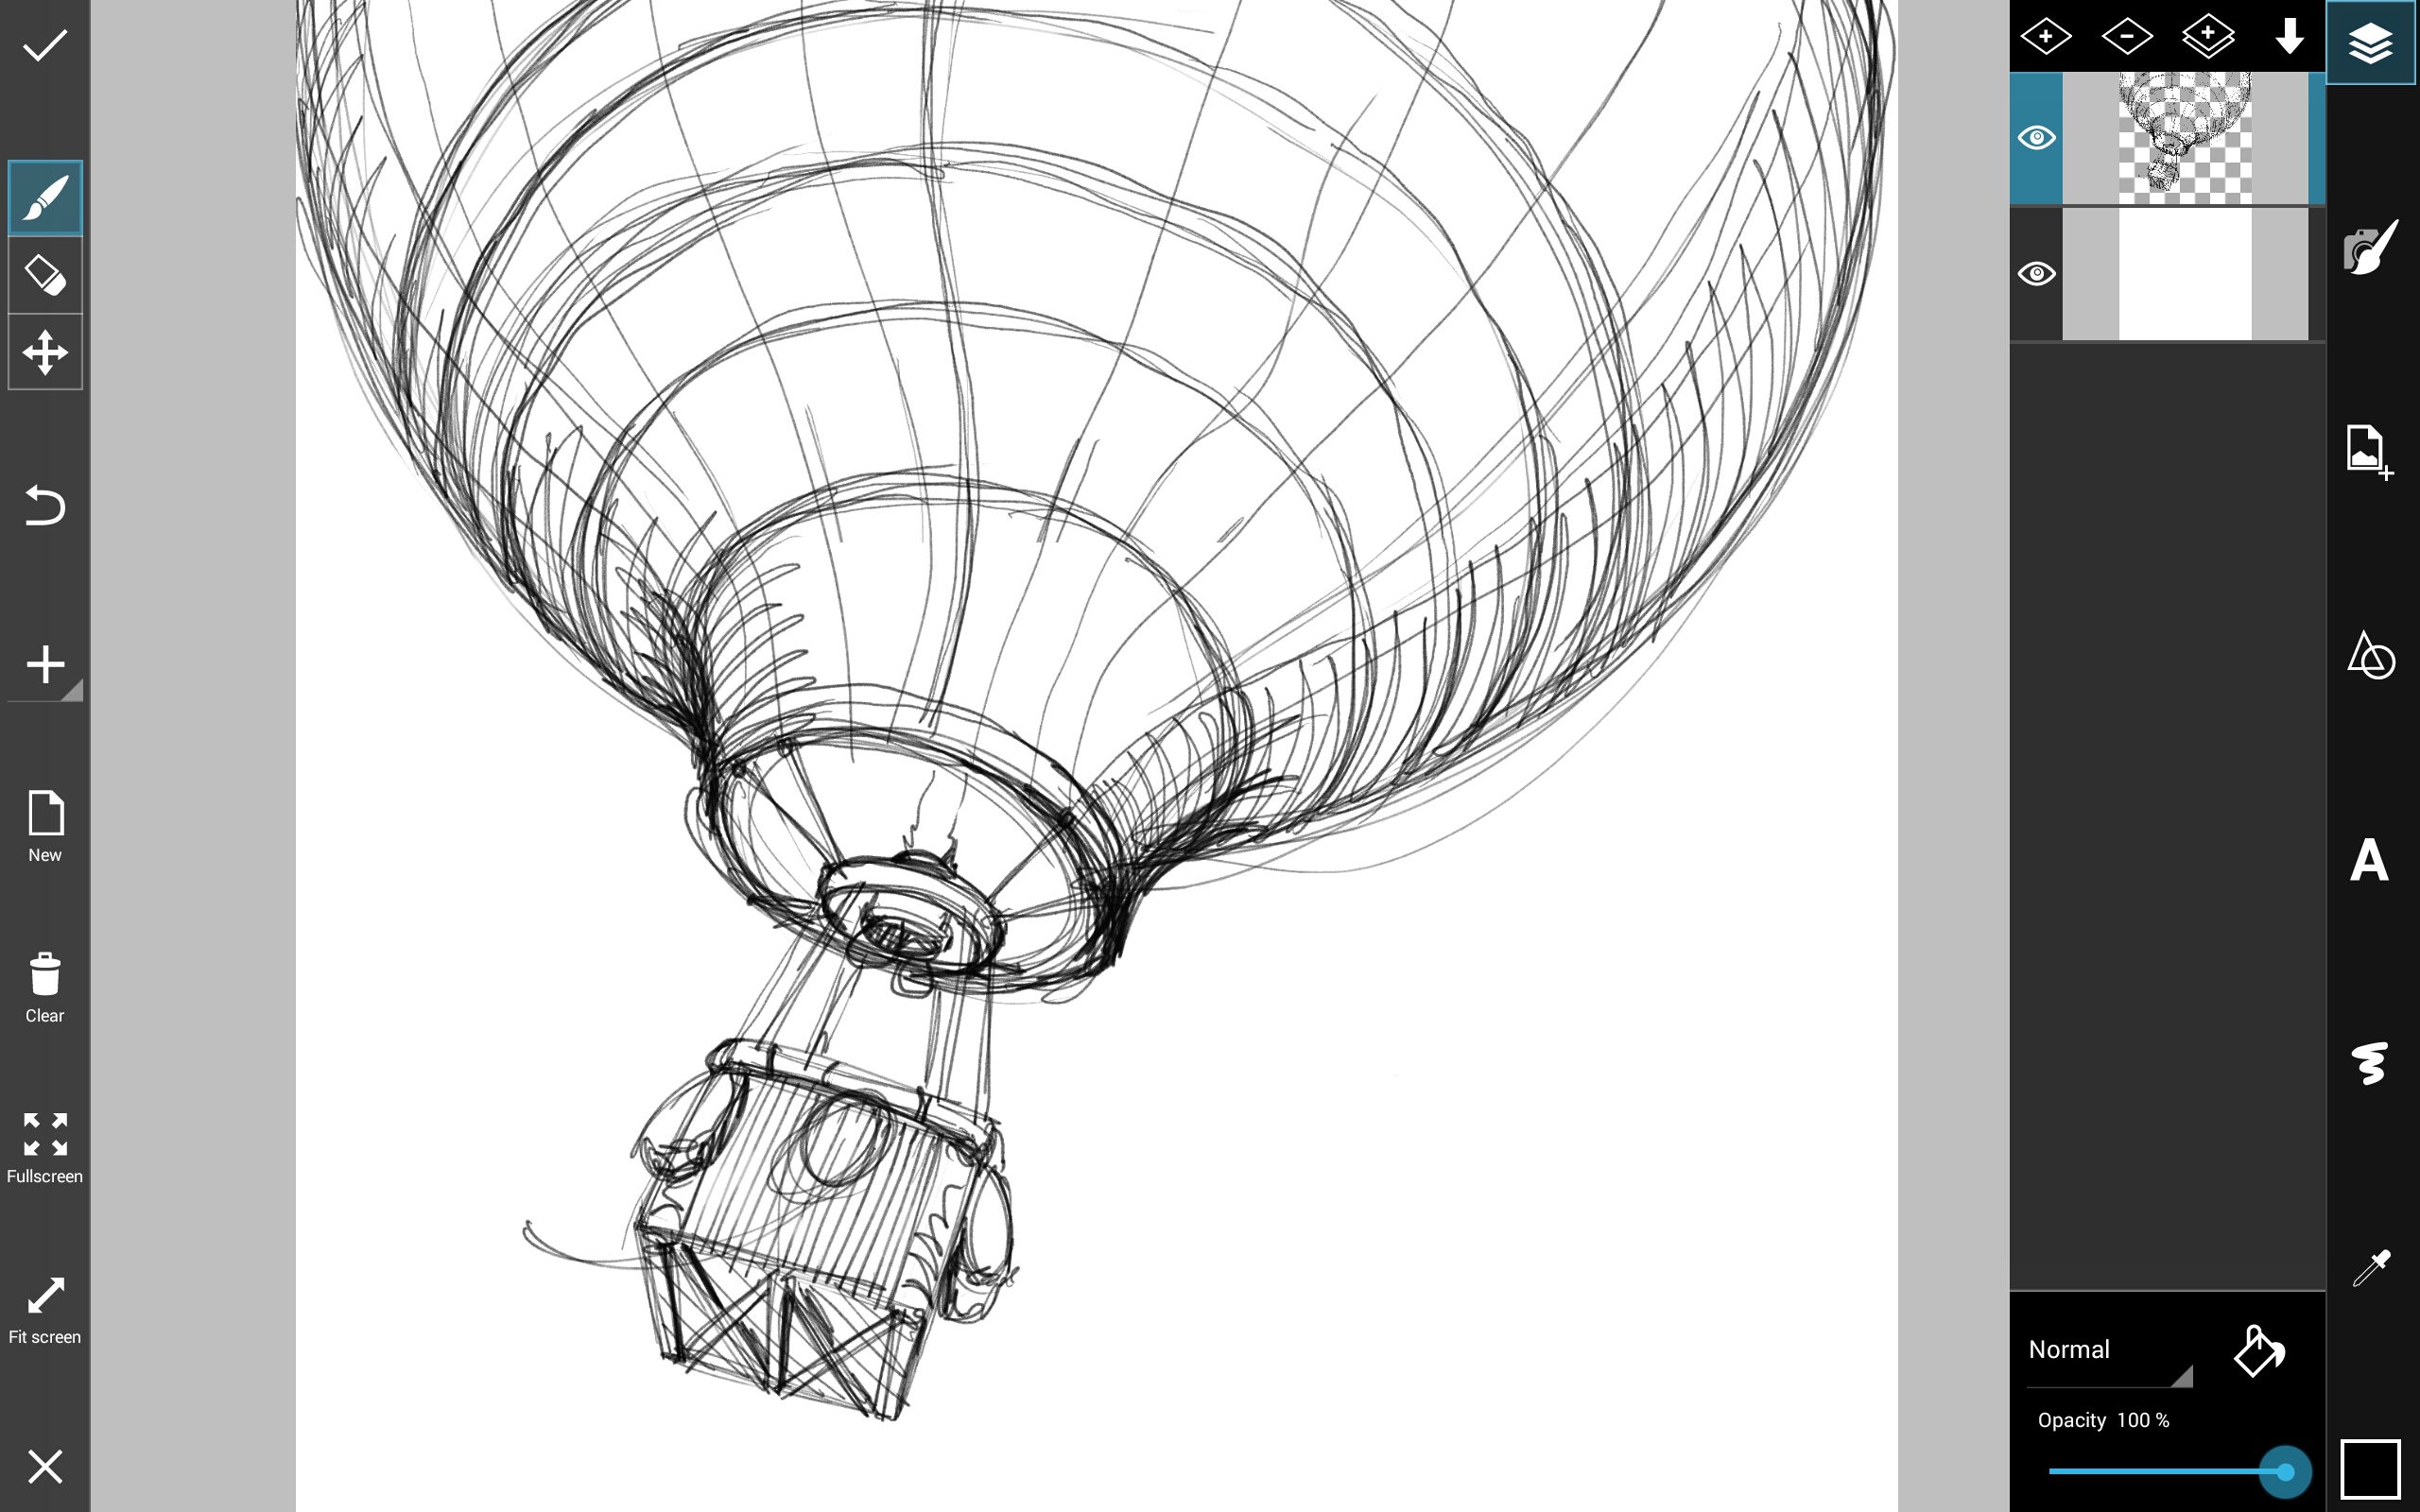 How to Draw a Hot Air Balloon Step by Step - Create + Discover with PicsArt